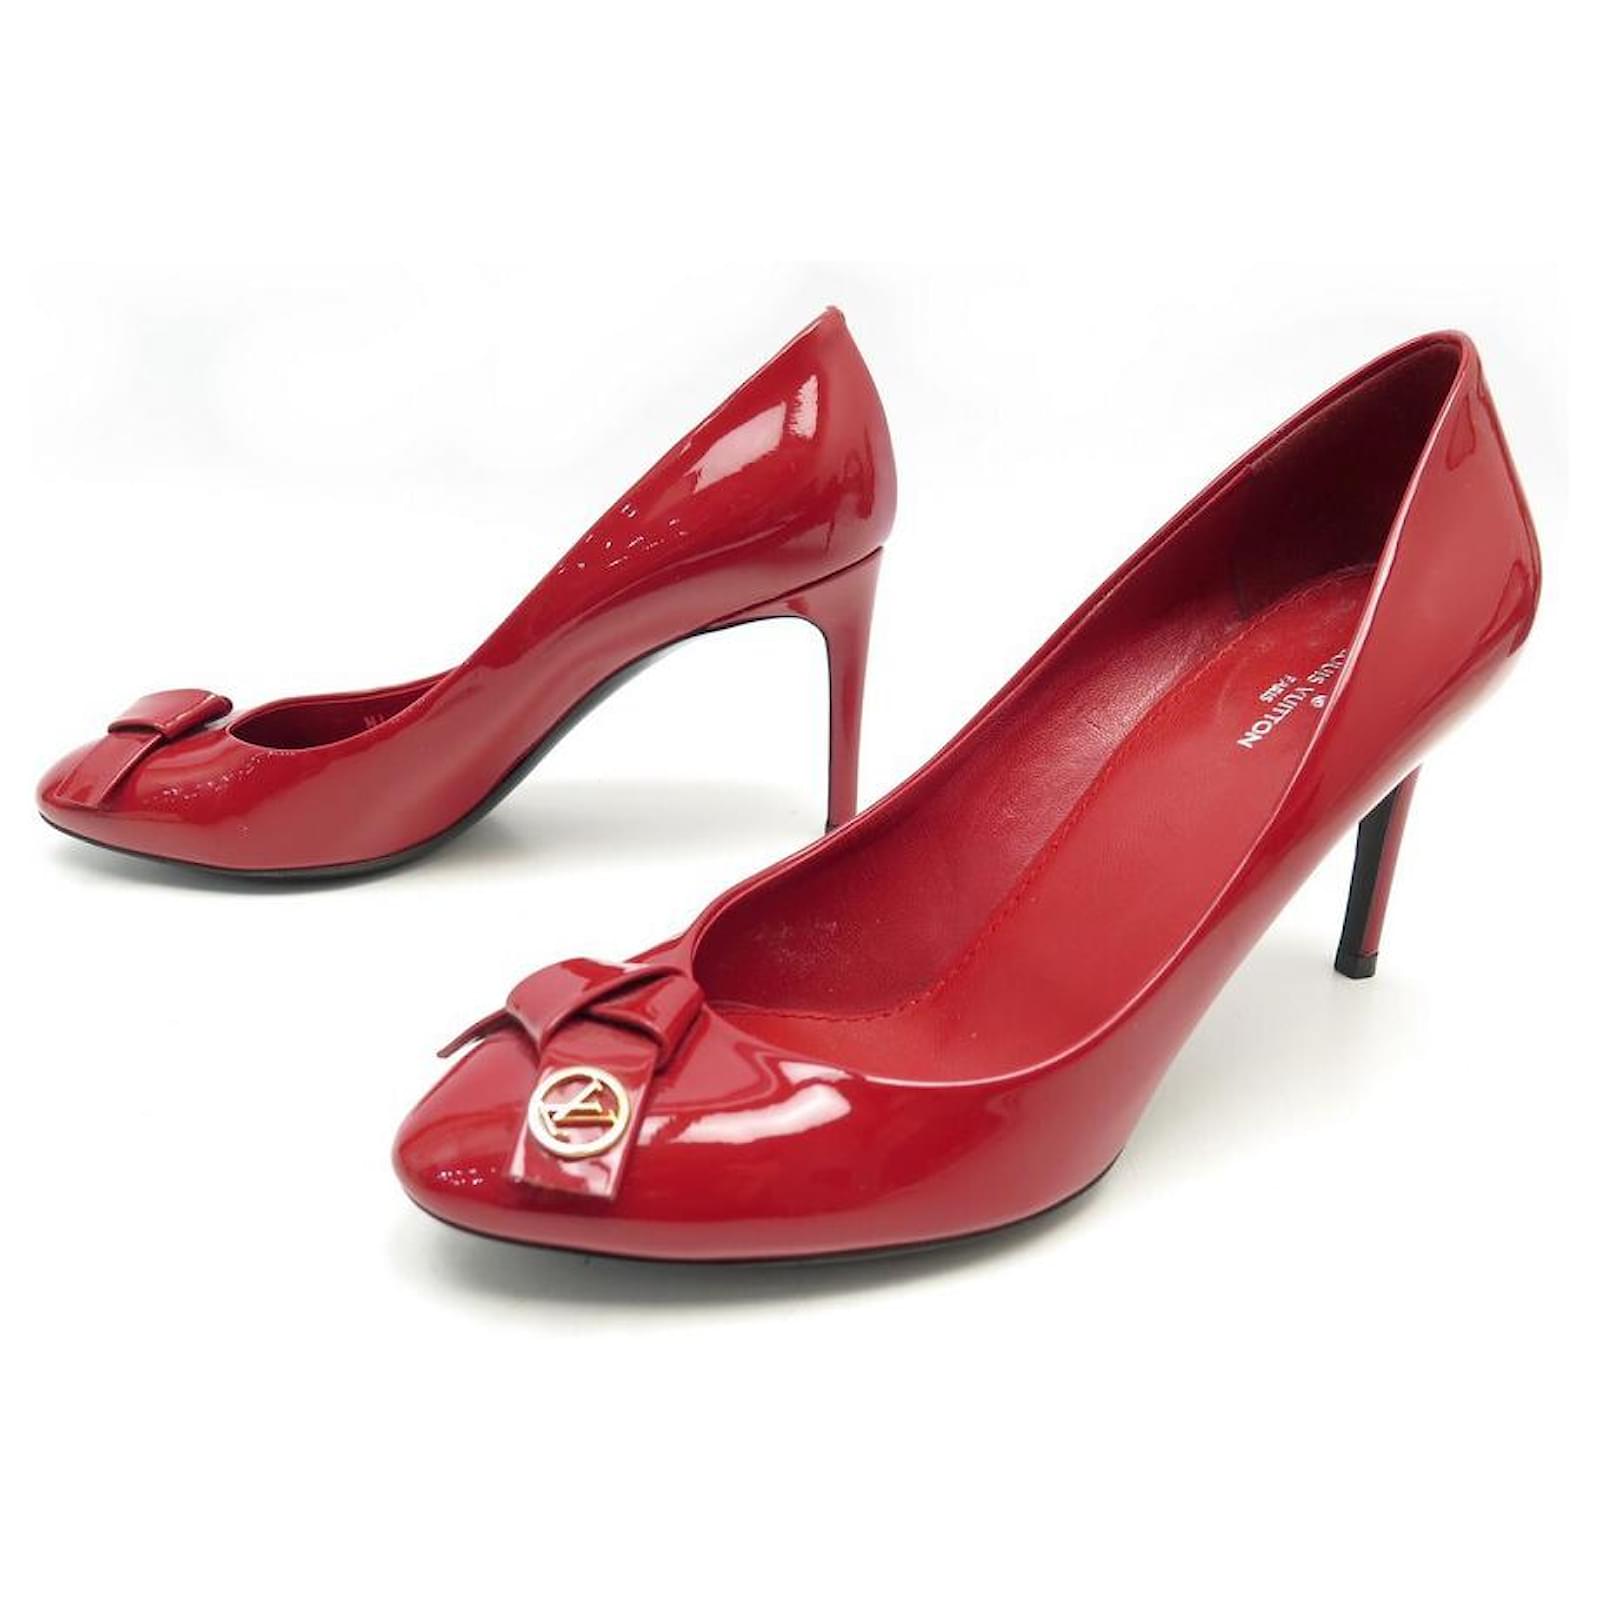 LOUIS VUITTON SHOES FIANCEE 37 RED PATENT LEATHER PUMP SHOES ref.411247 -